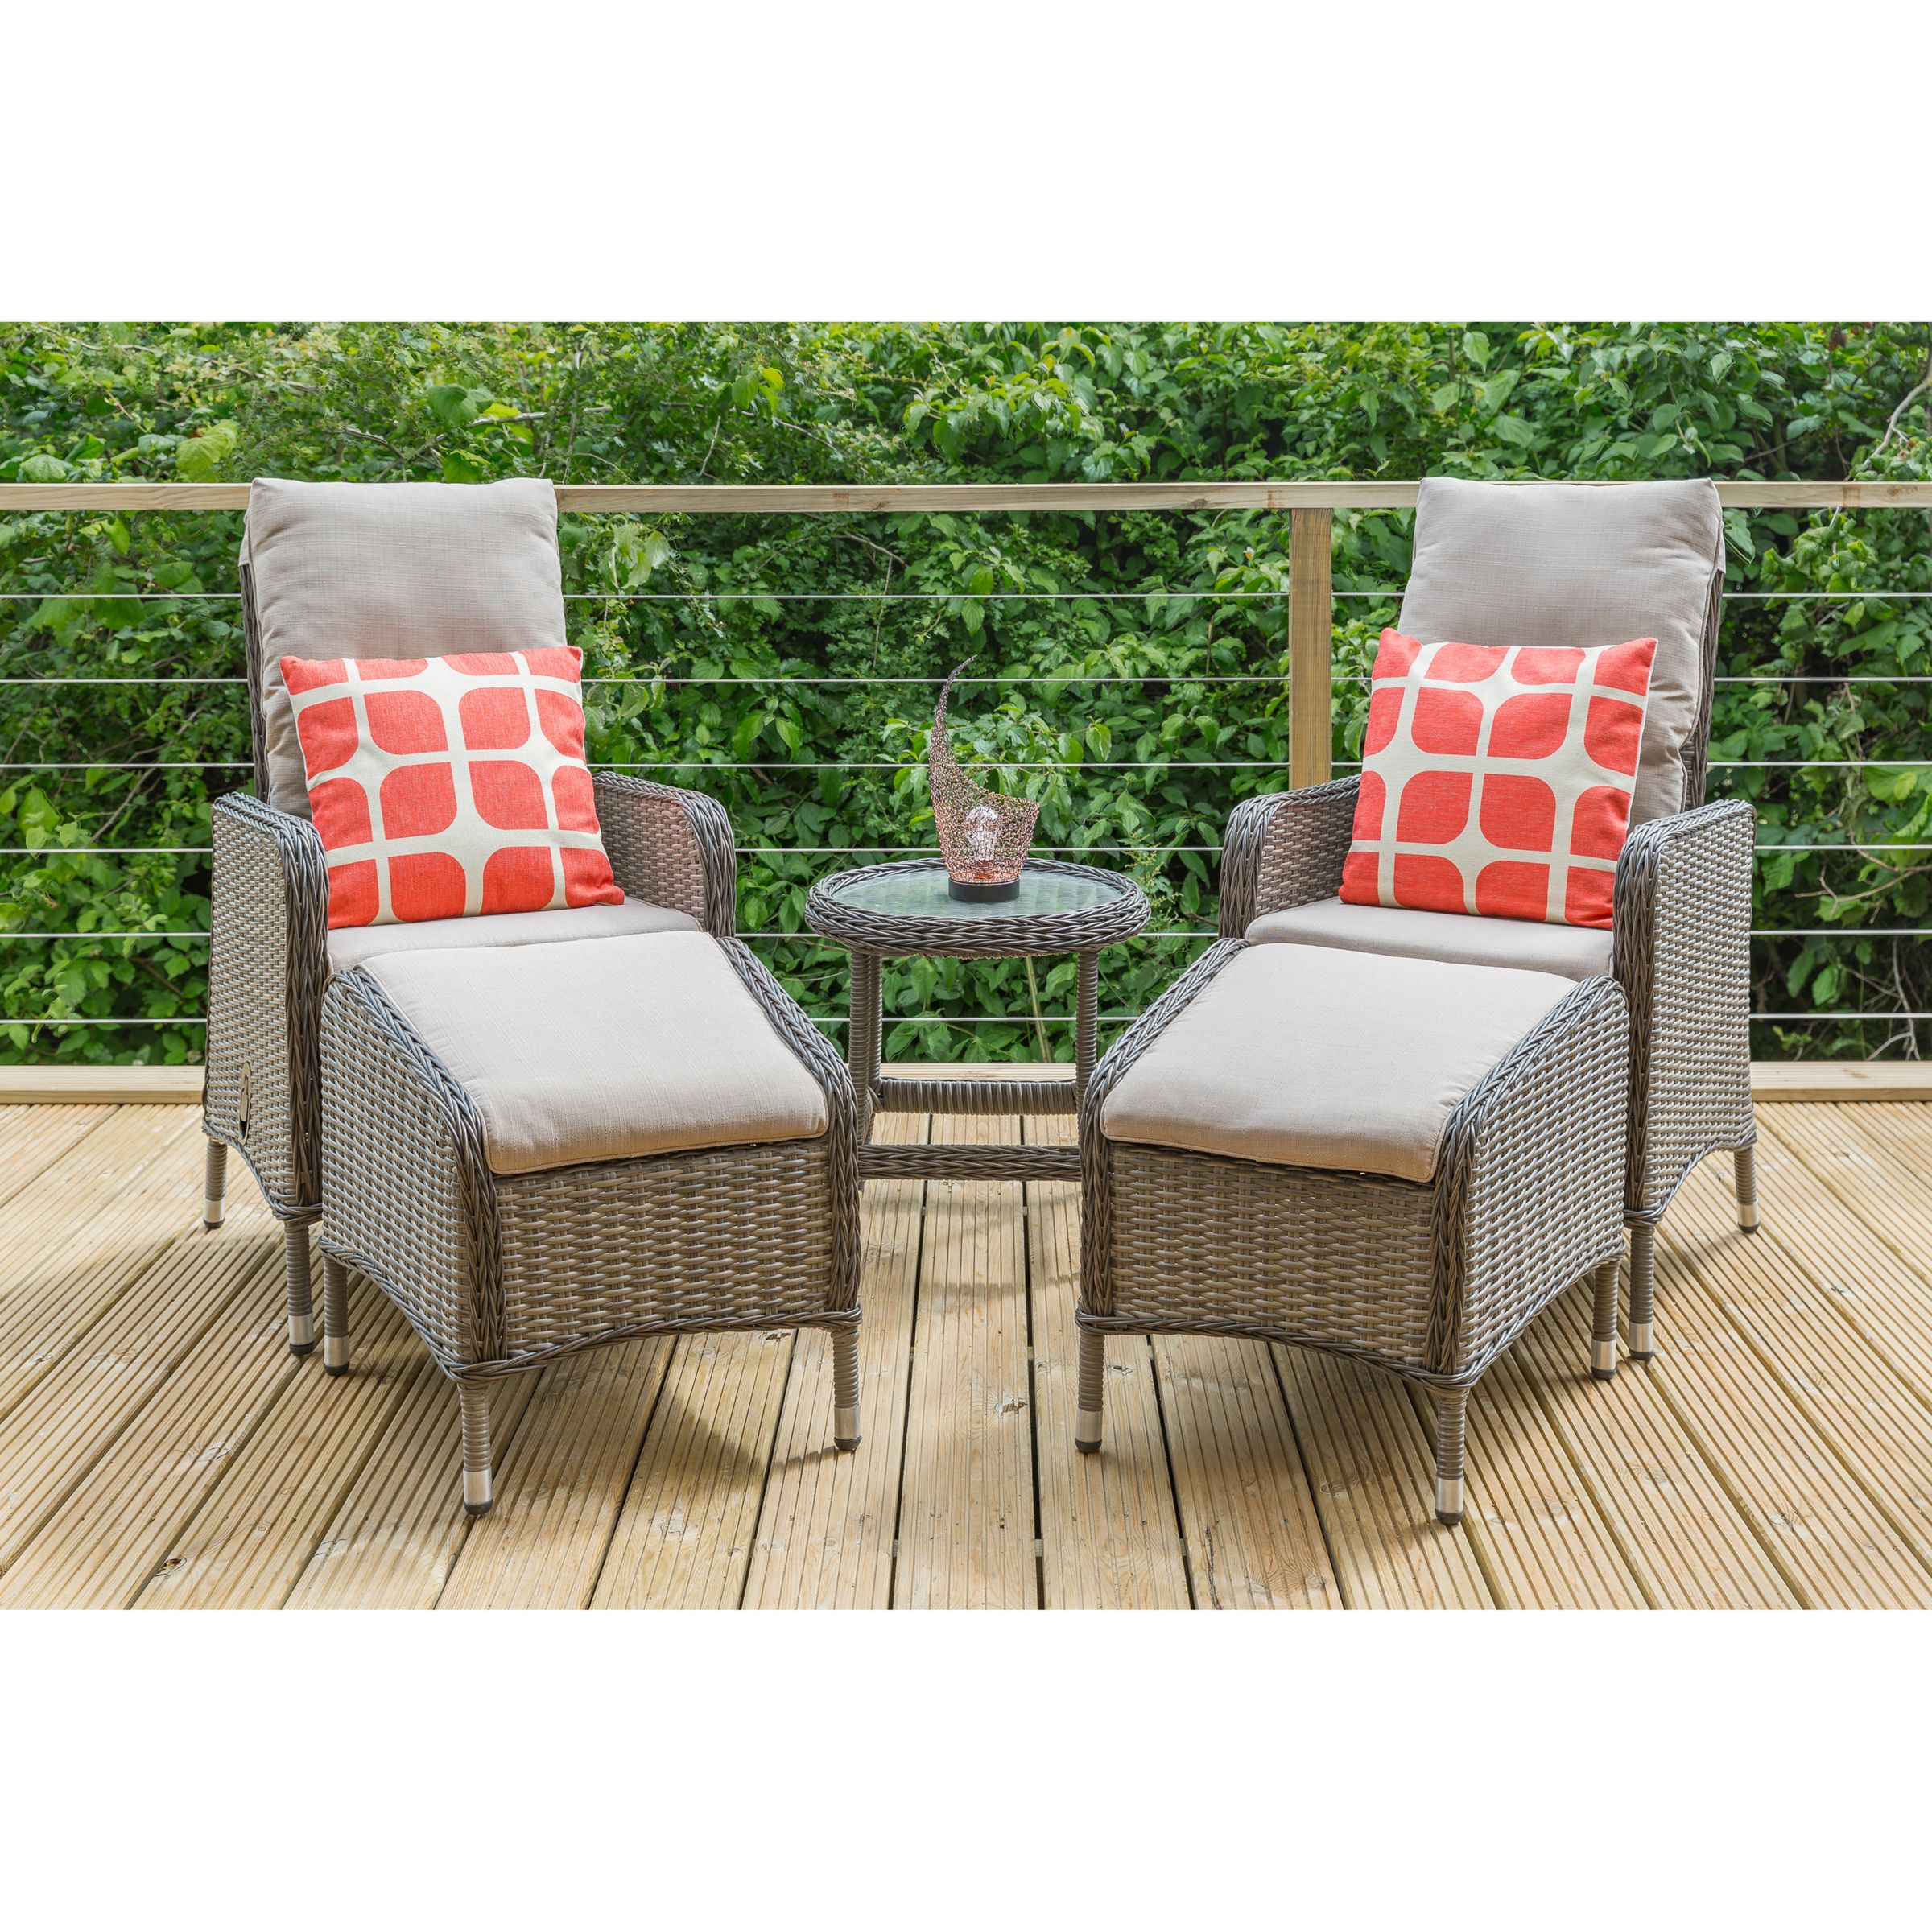 Lg Outdoor Marseille 2 Seater Reclining Garden Chairs With